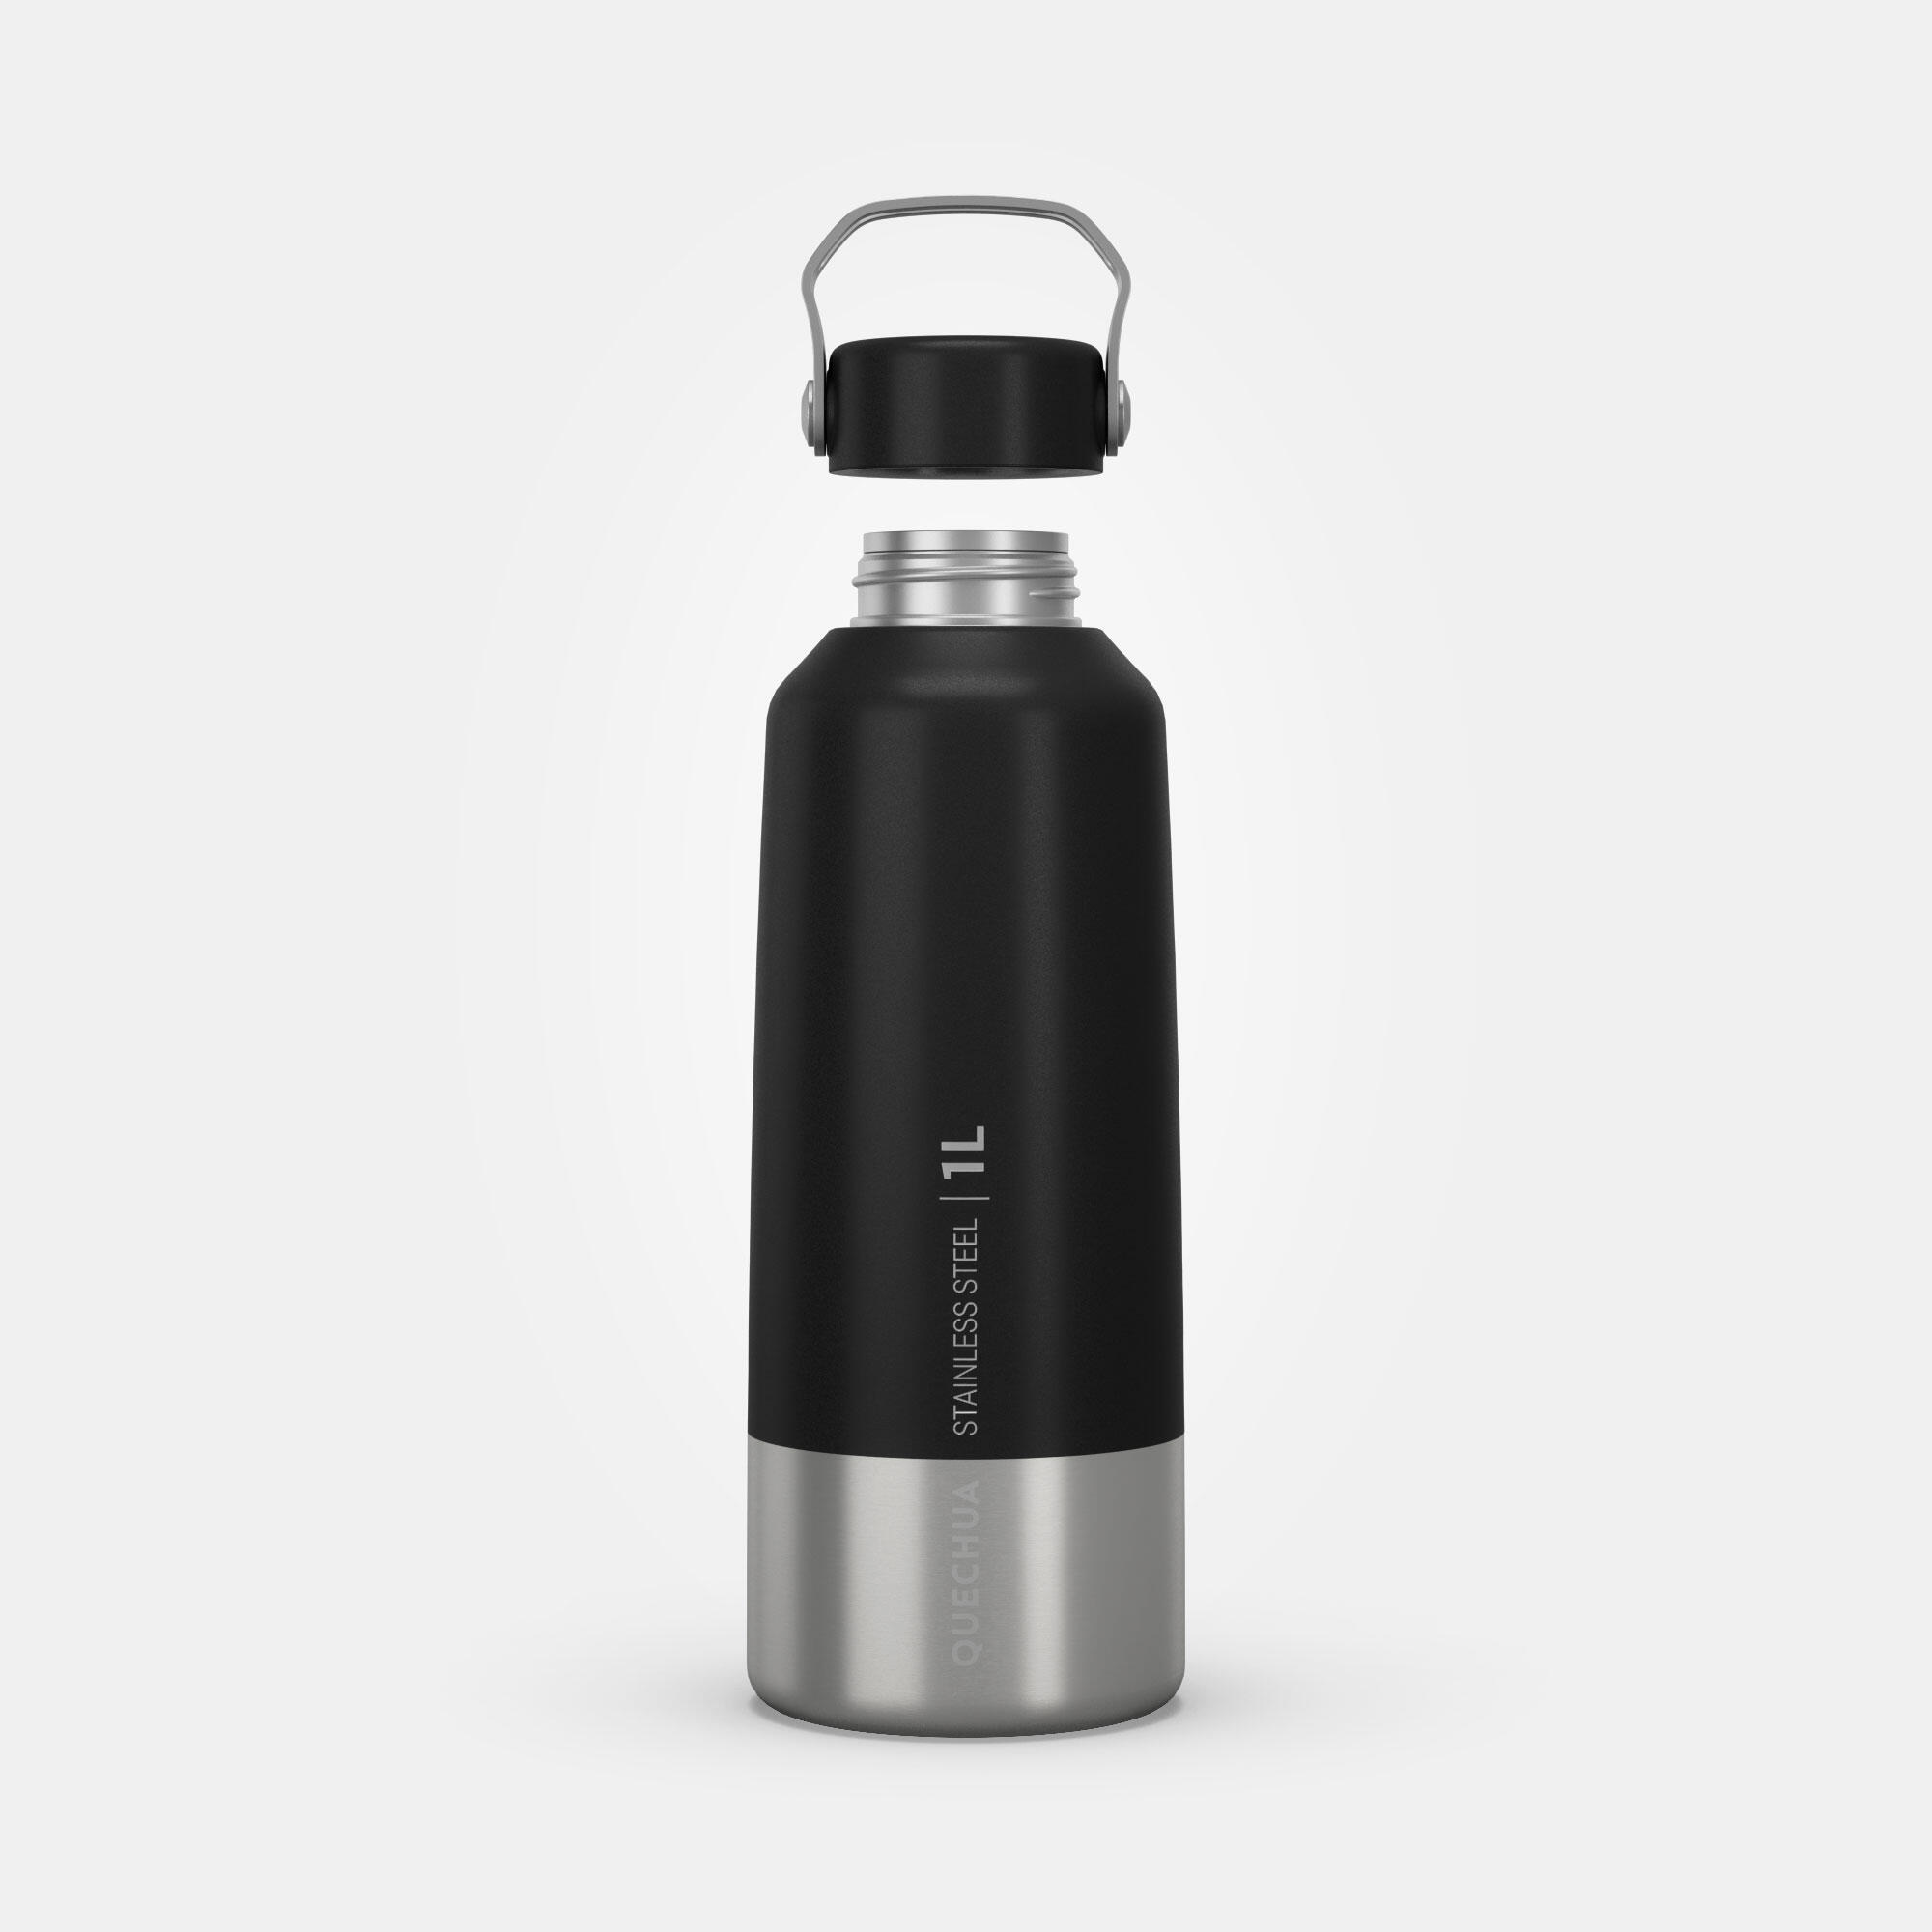 Stainless Steel Hiking Water Bottle - MH 100 - QUECHUA